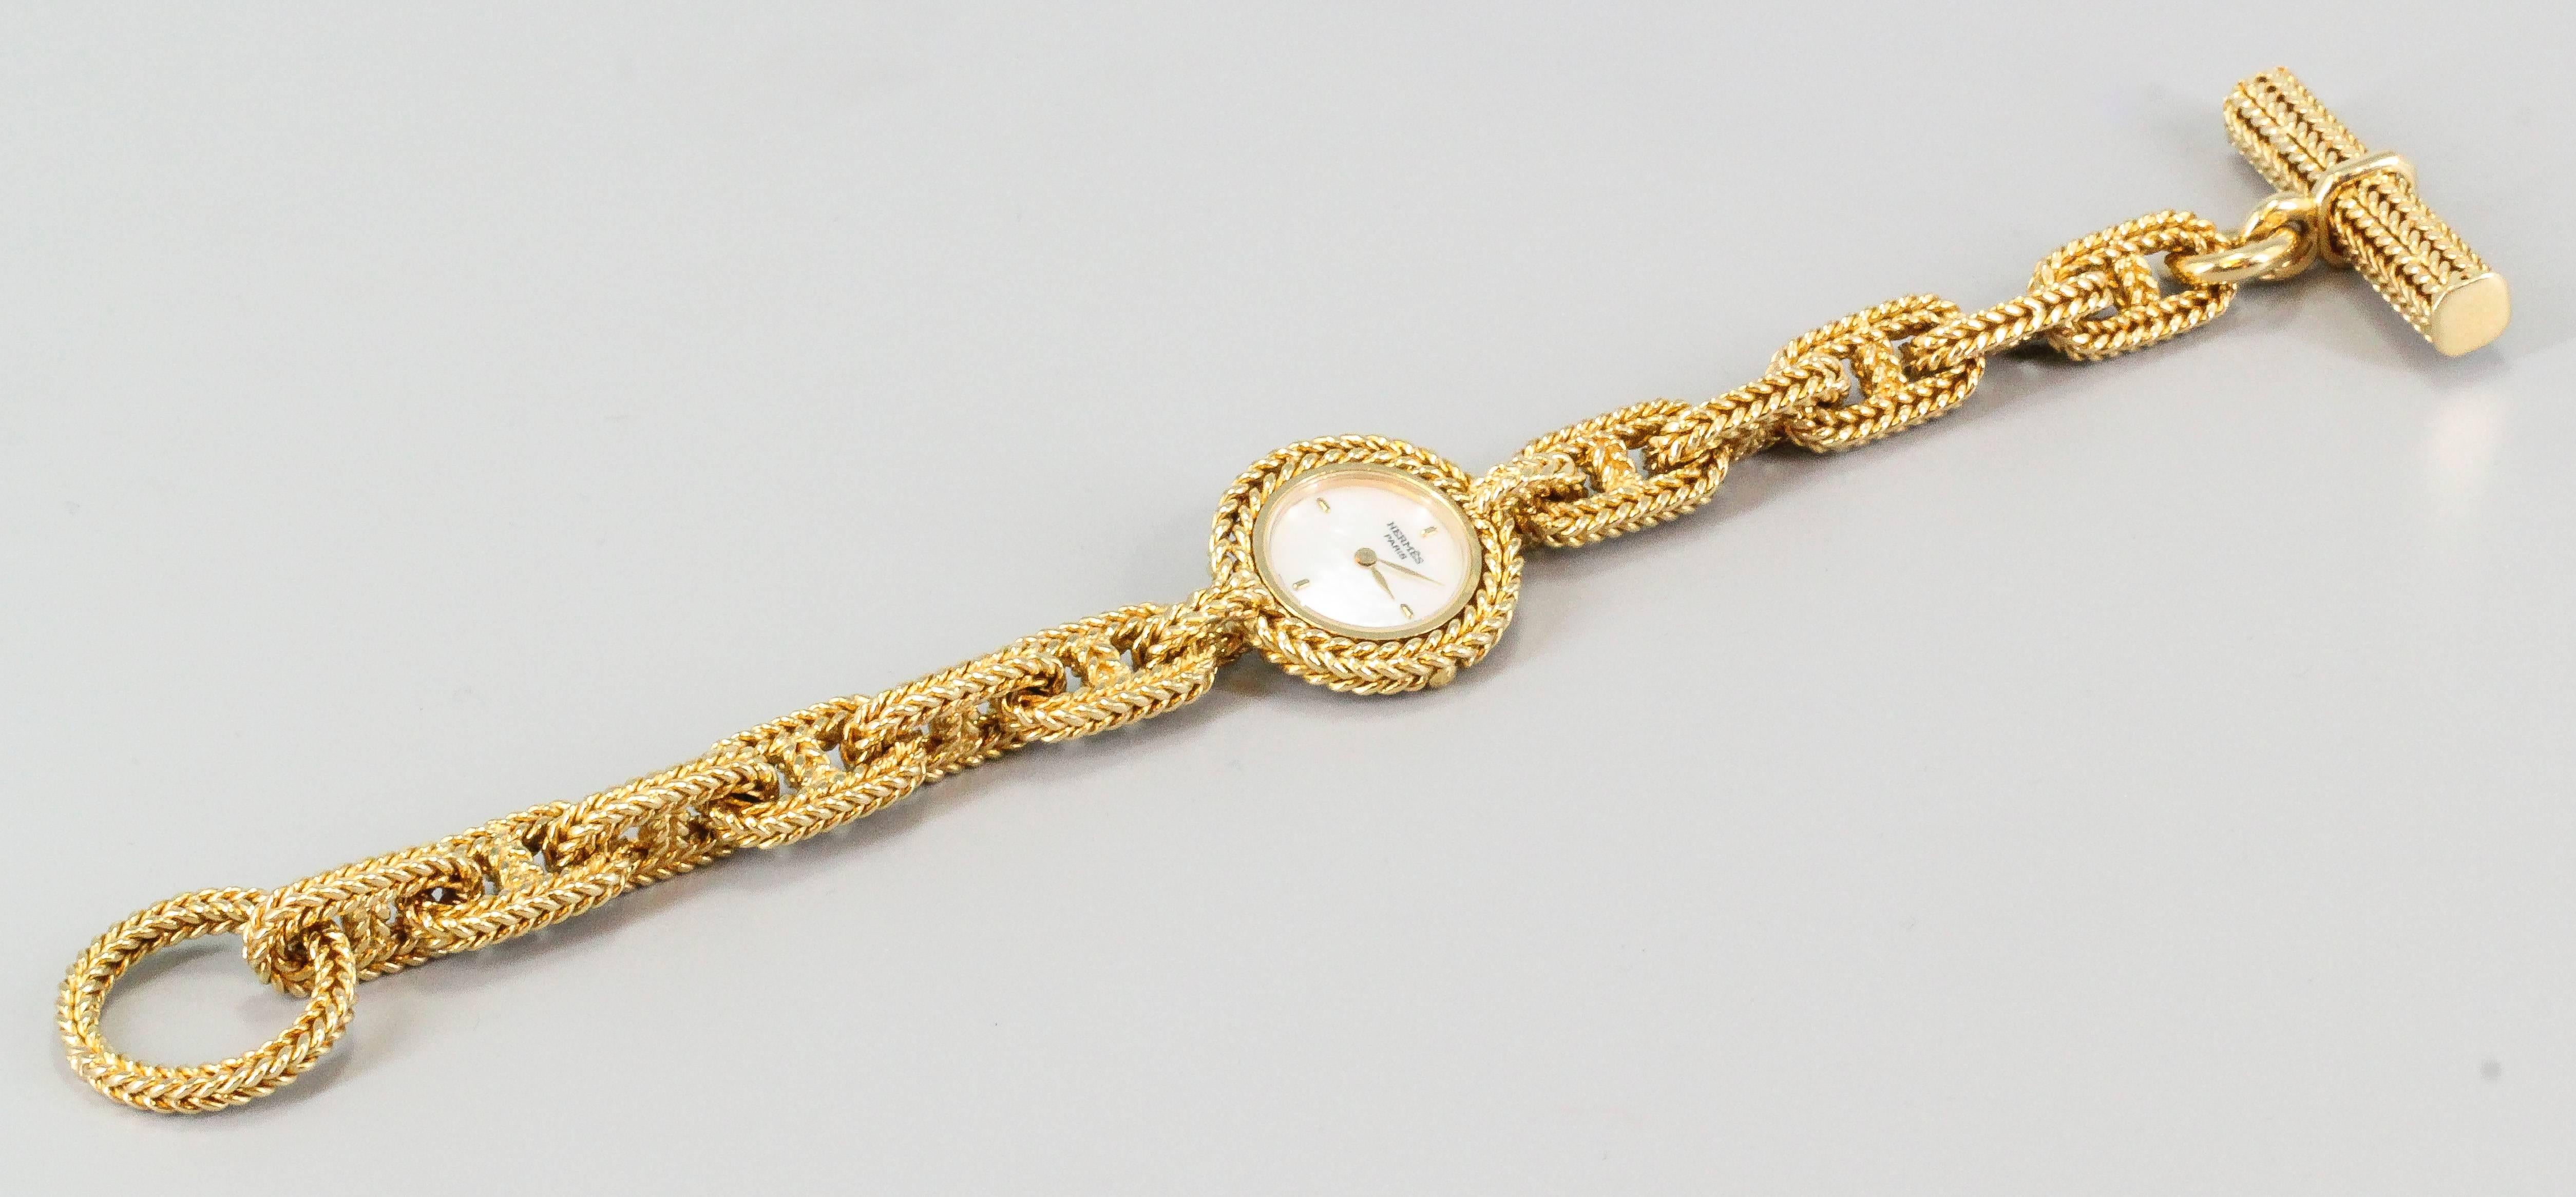 Fine and unusual 18K yellow gold toggle link bracelet watch from the "Chaine D'Ancre" collection by Hermes. Features a mother-of-pearl dial and a quartz movement. Beautifully made with expert workmanship. Rare in that it features the